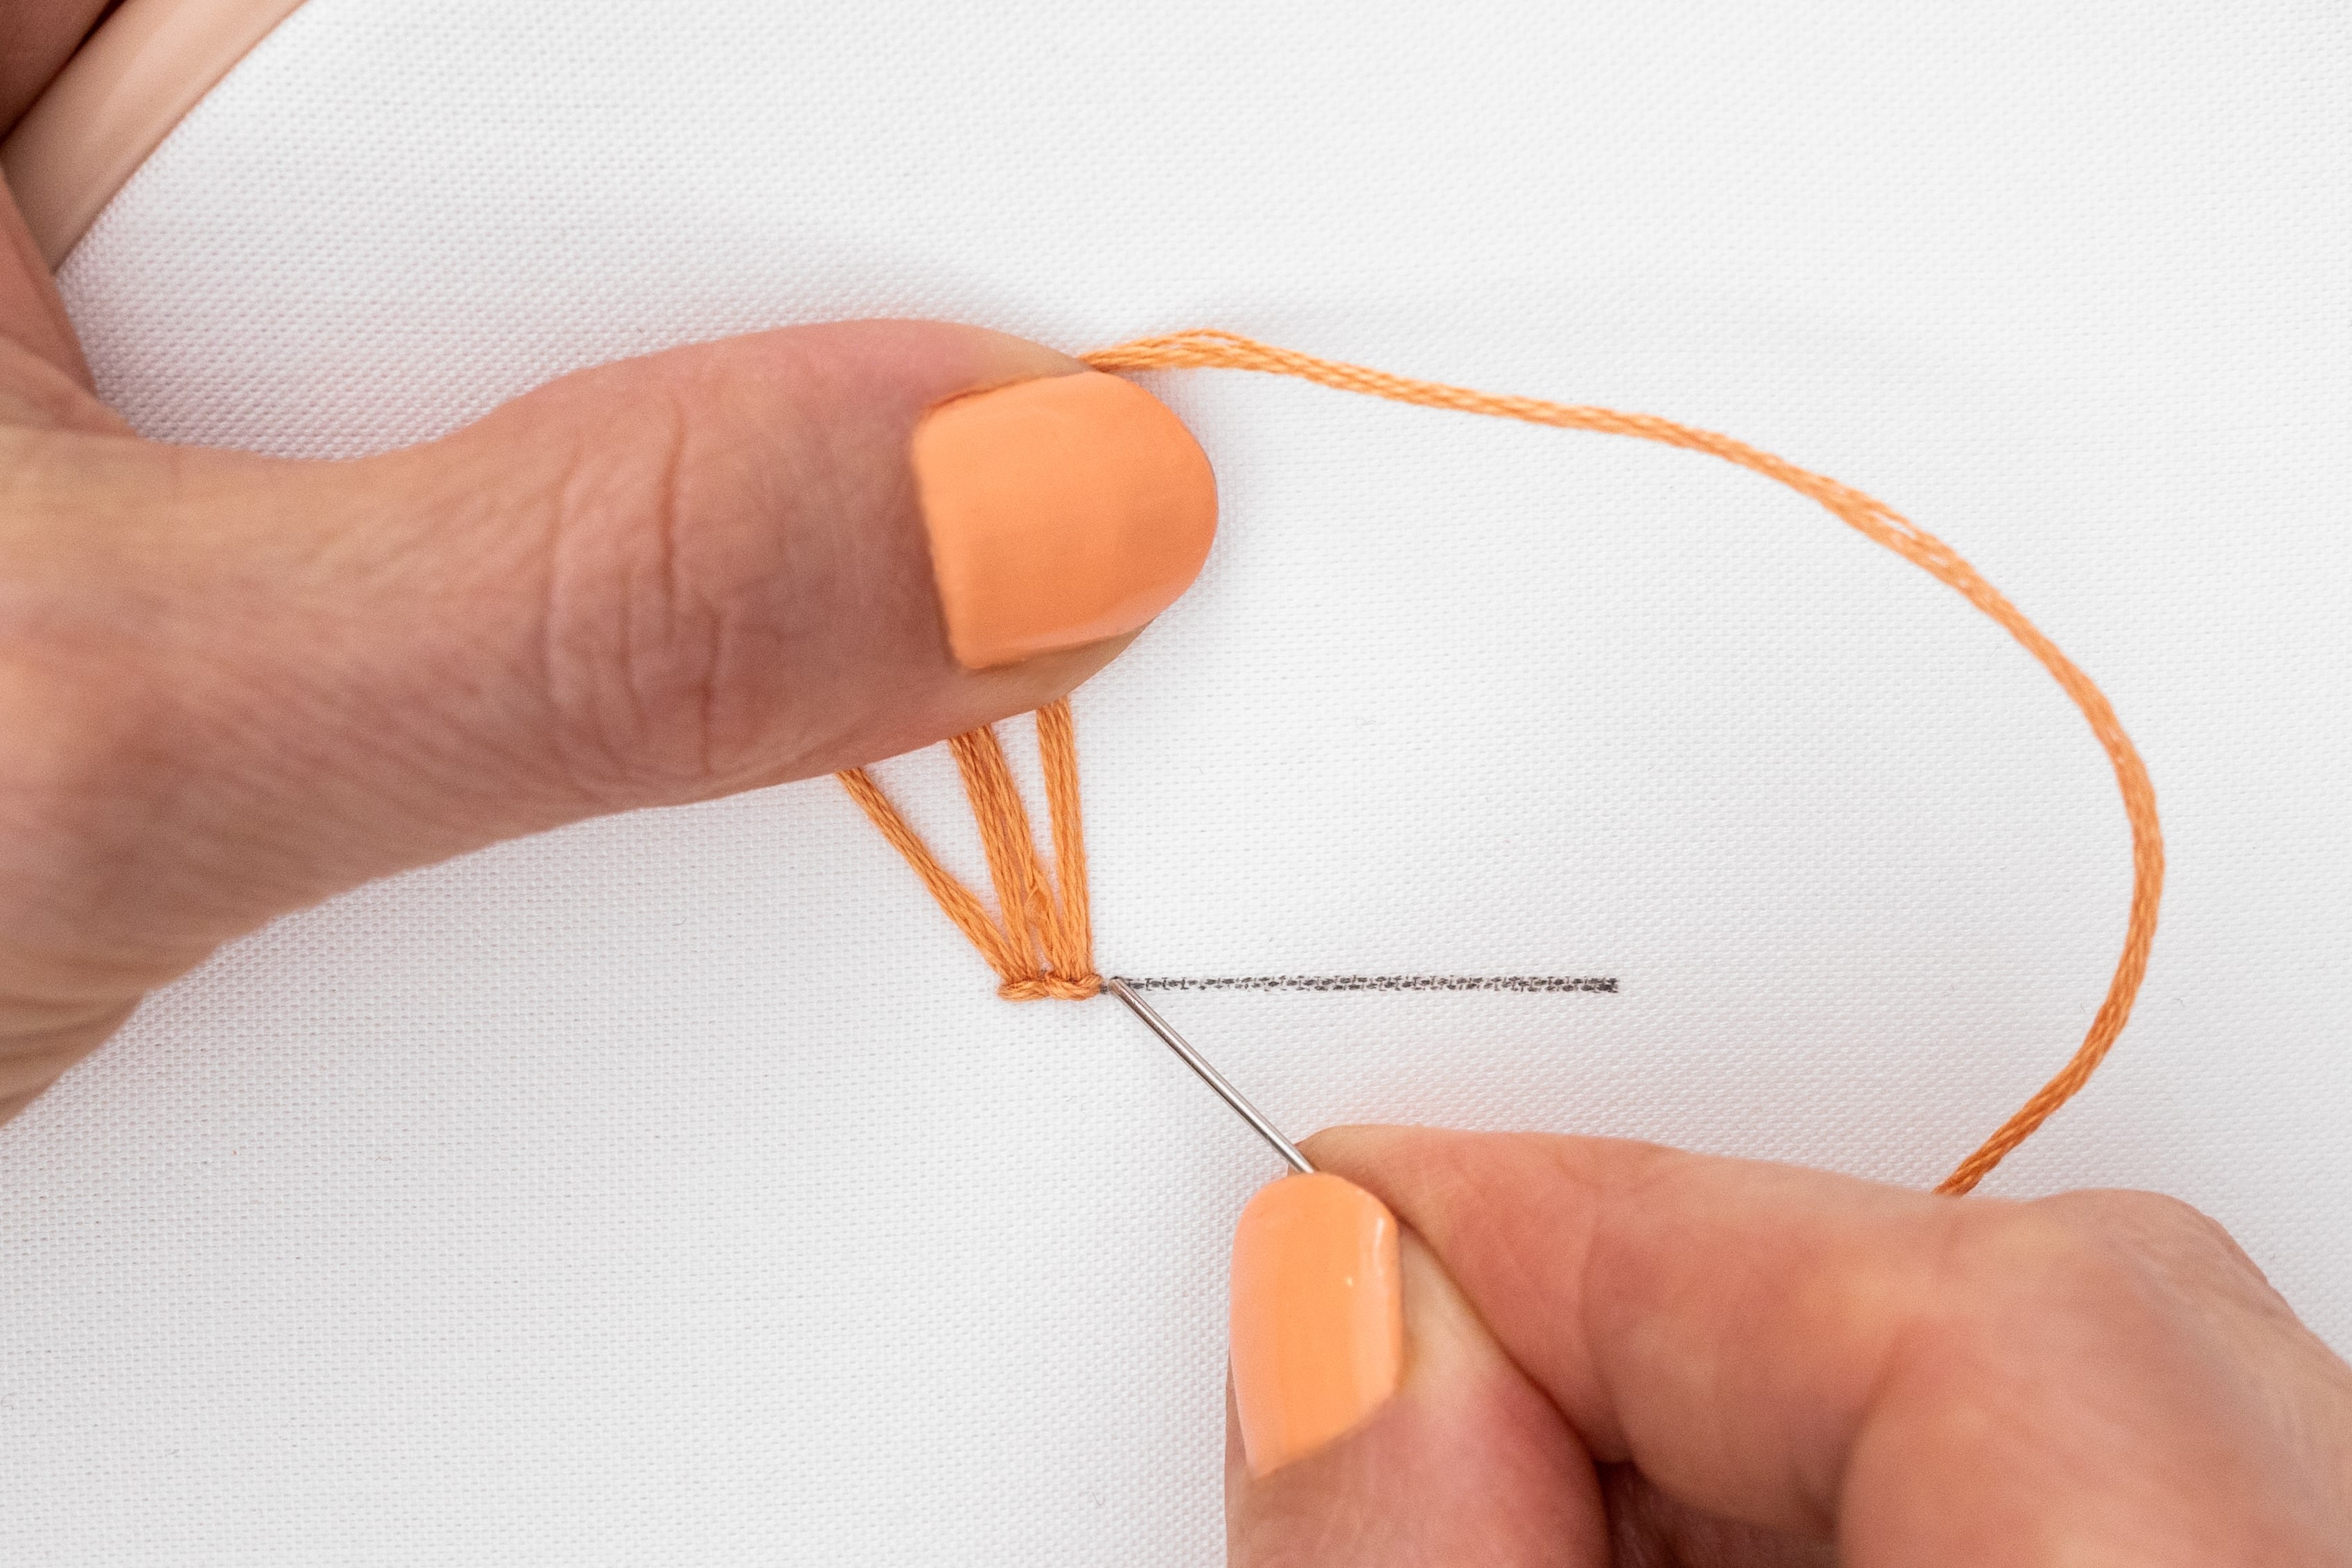 A needle is bought down into the cotton fabric.